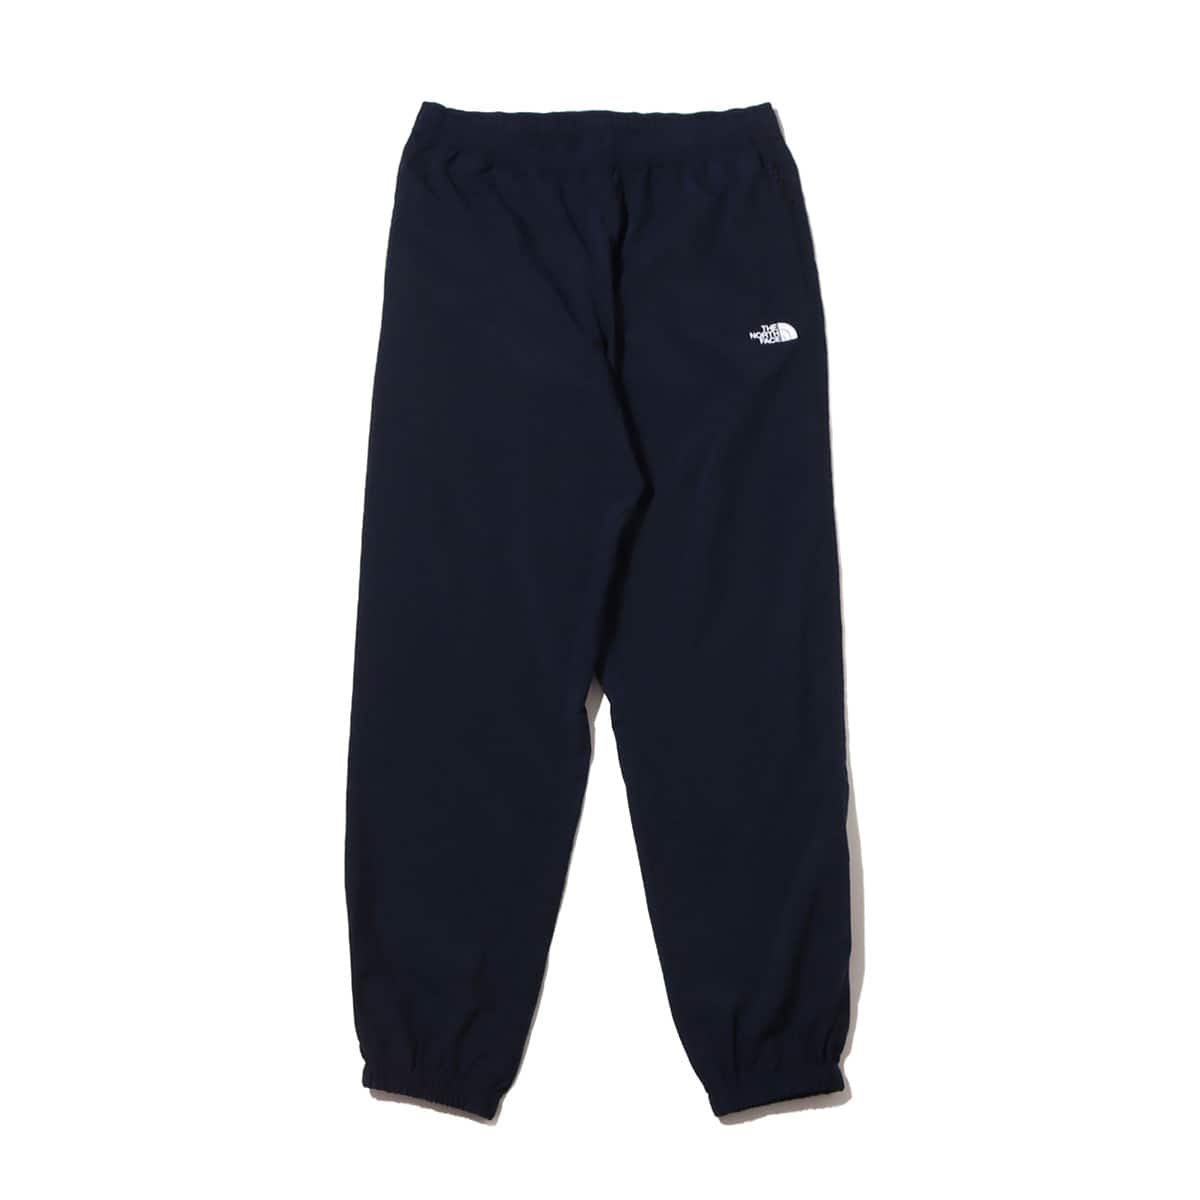 THE NORTH FACE Versatile pants アーバンネイビー - その他